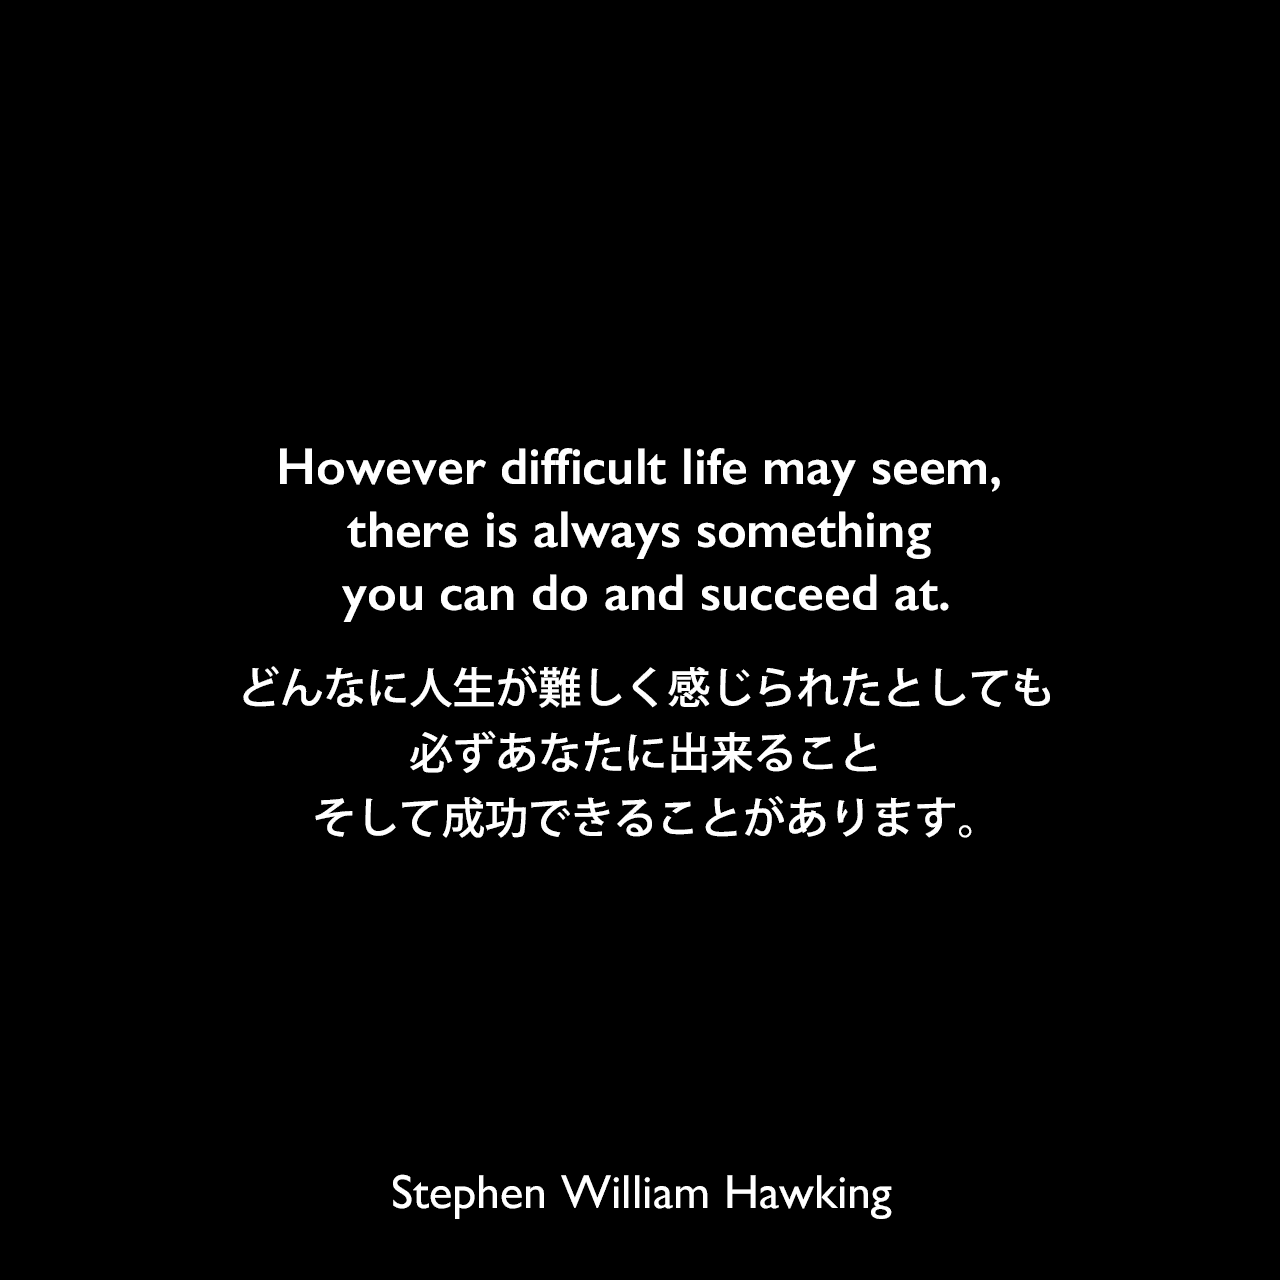 However difficult life may seem, there is always something you can do and succeed at.どんなに人生が難しく感じられたとしても、必ずあなたに出来ること、そして成功できることがあります。- 2006年の「People's Daily Online」より自発的安楽死についてStephen William Hawking